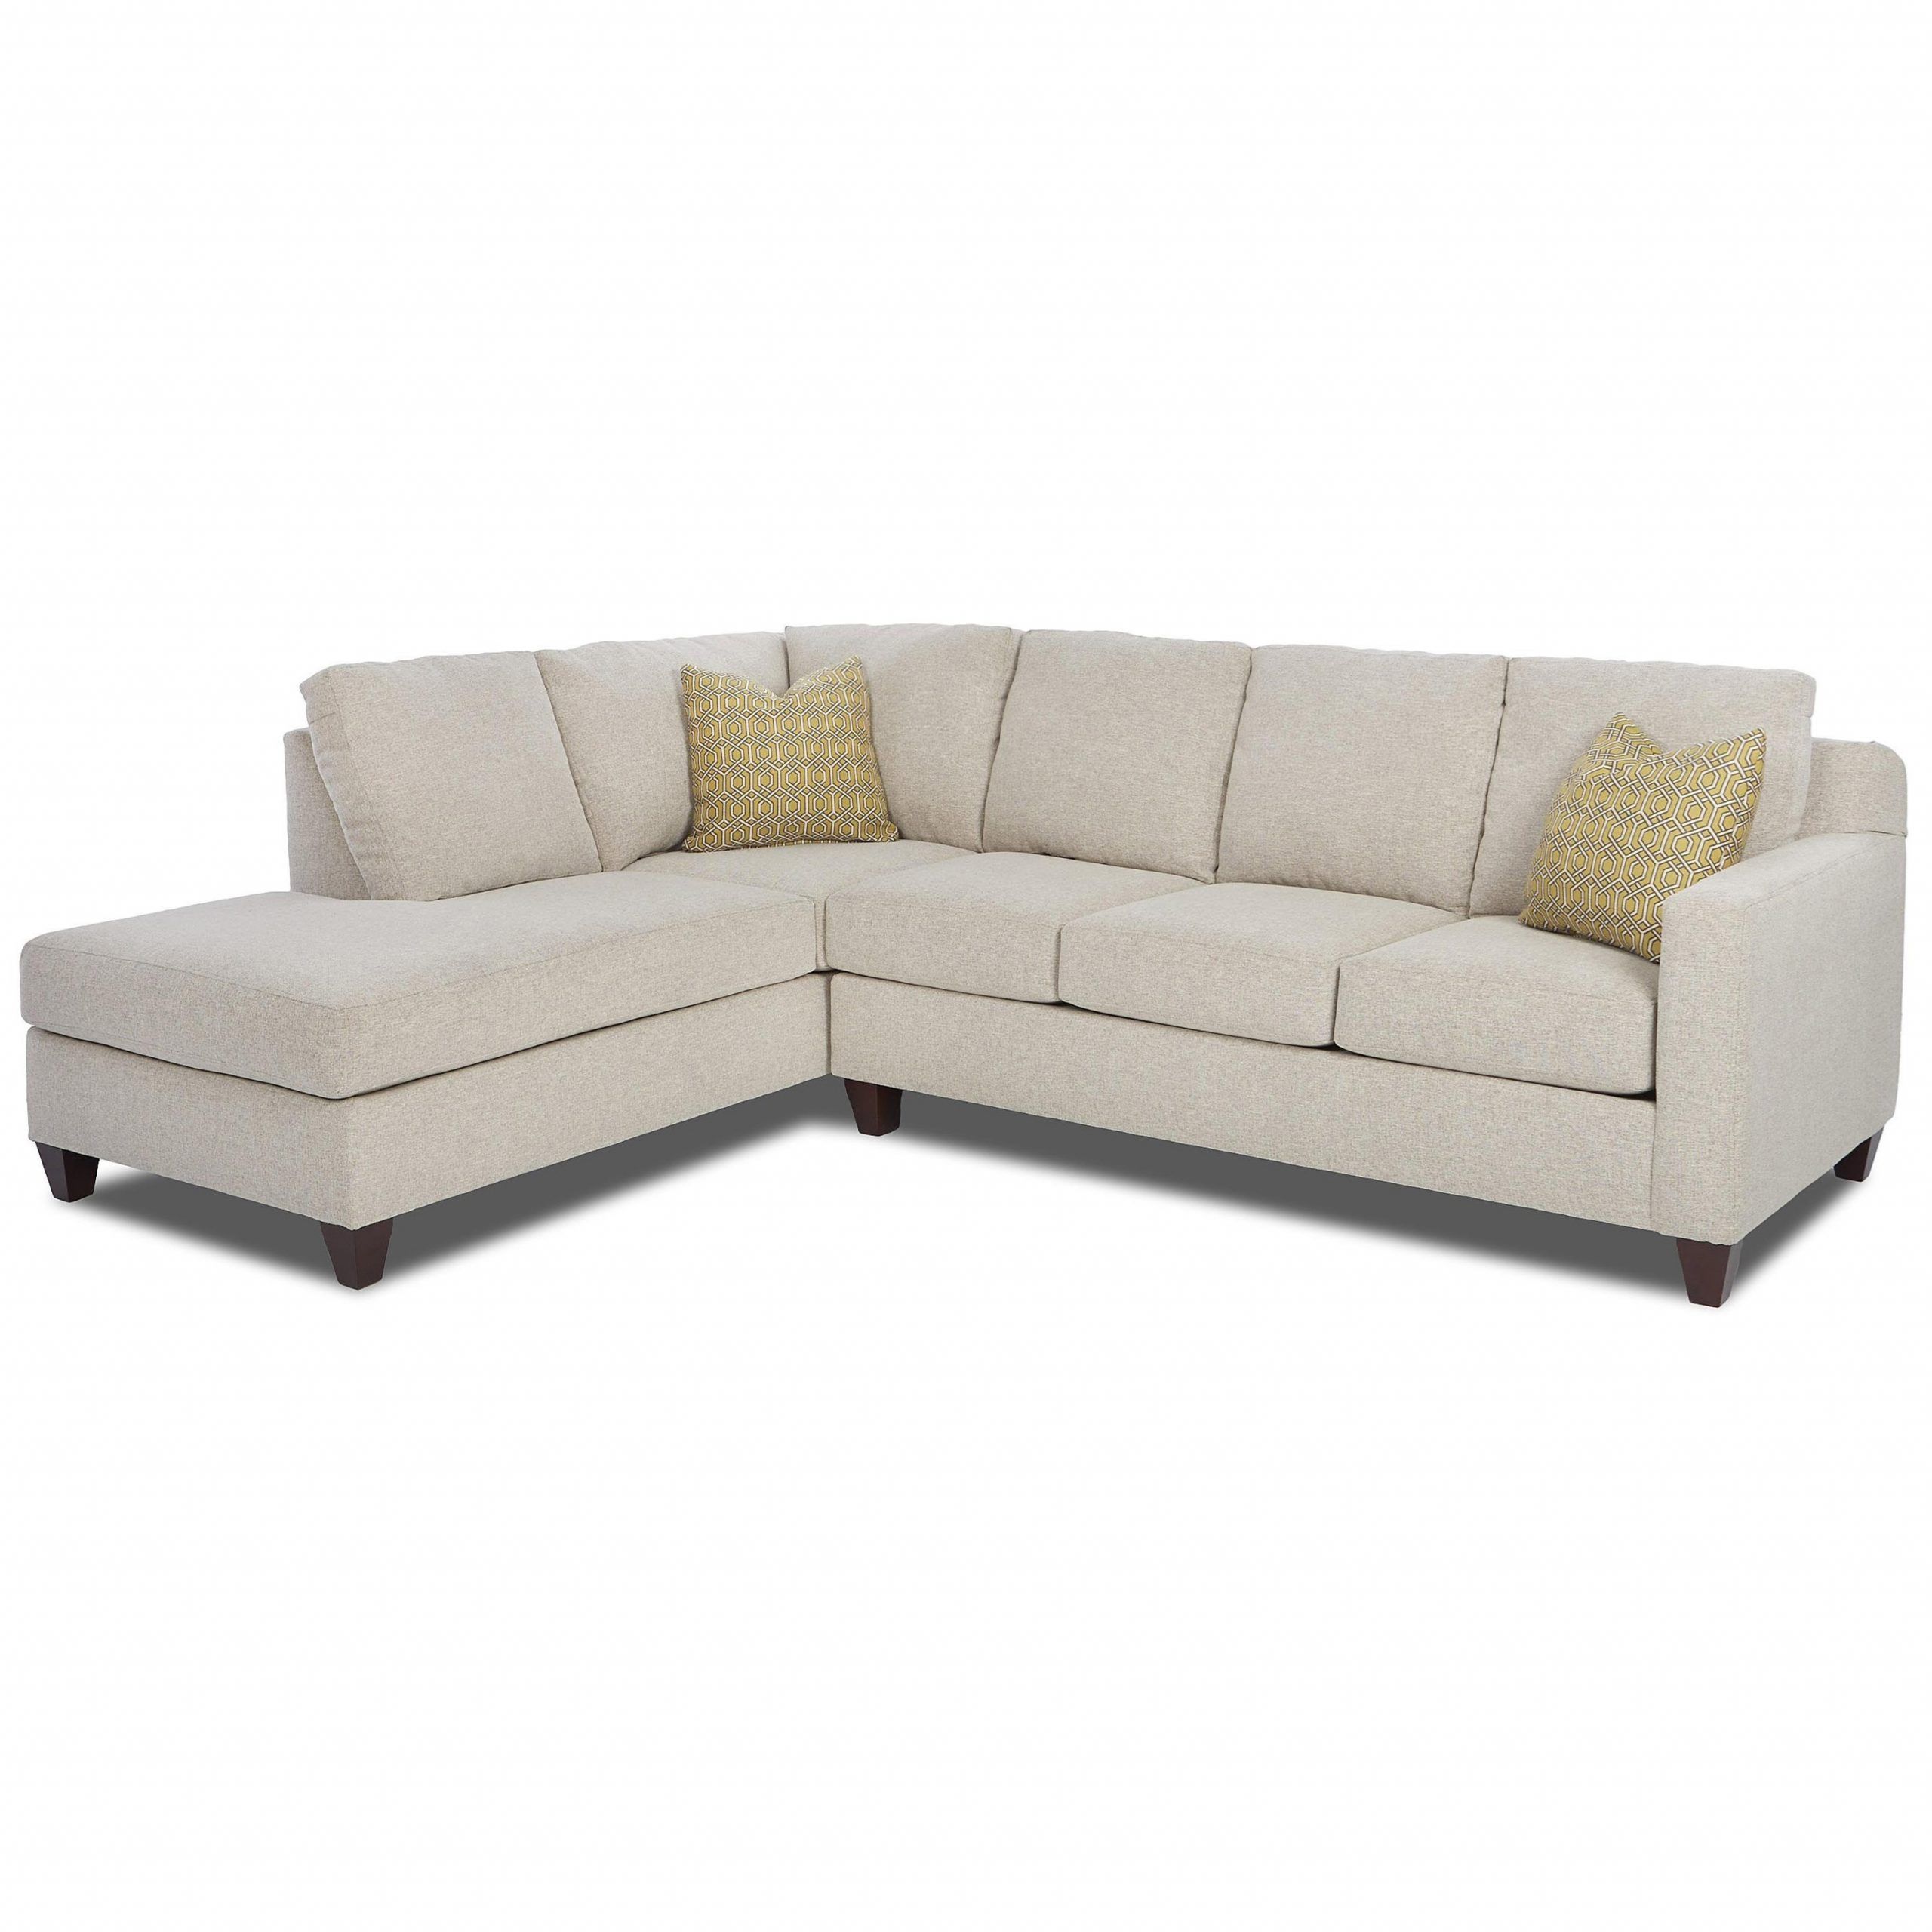 Klaussner Bosco Contemporary 2 Piece Sectional With Left Regarding Hannah Left Sectional Sofas (View 5 of 15)